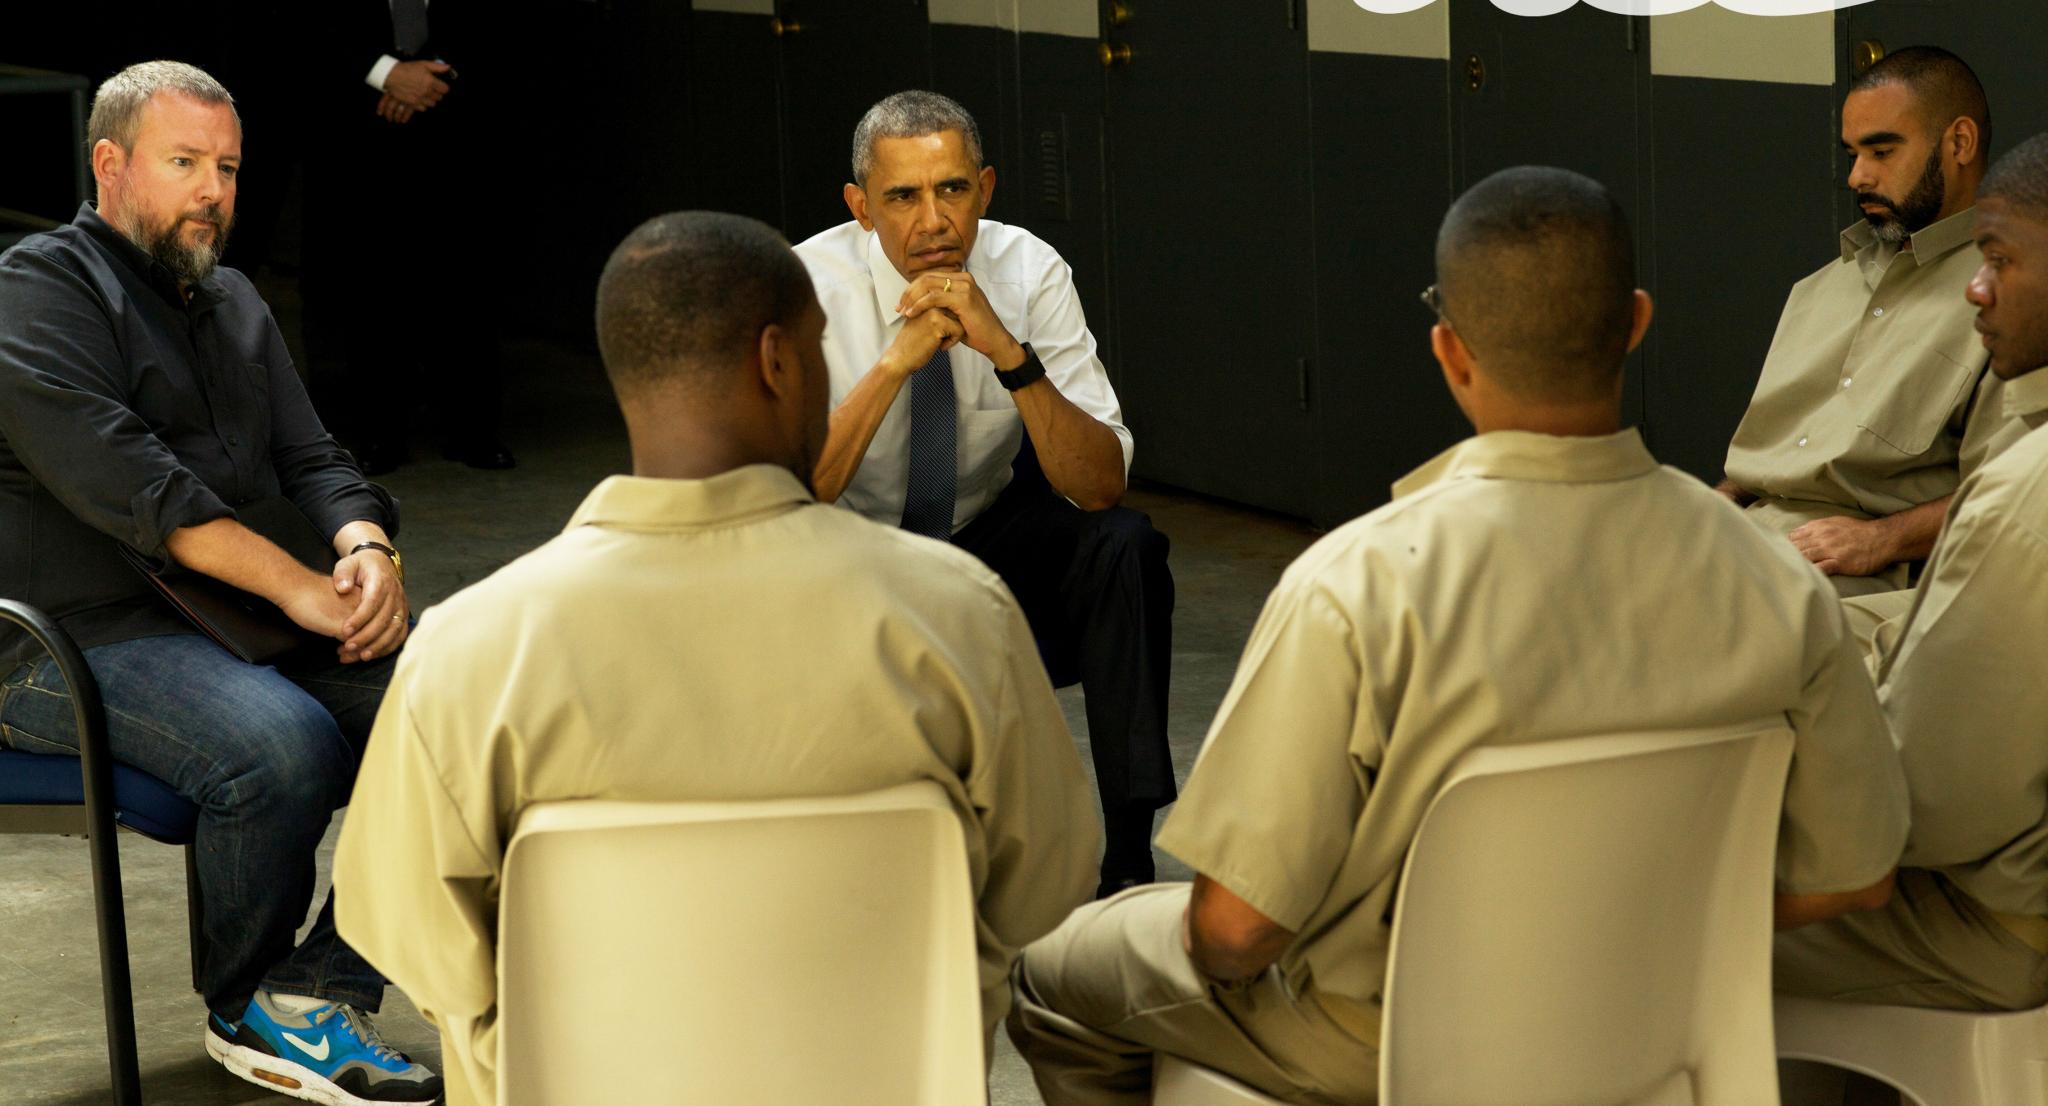 HBO Doc 'Fixing the System' Looks At America's Prison System, and It's Heartbreaking